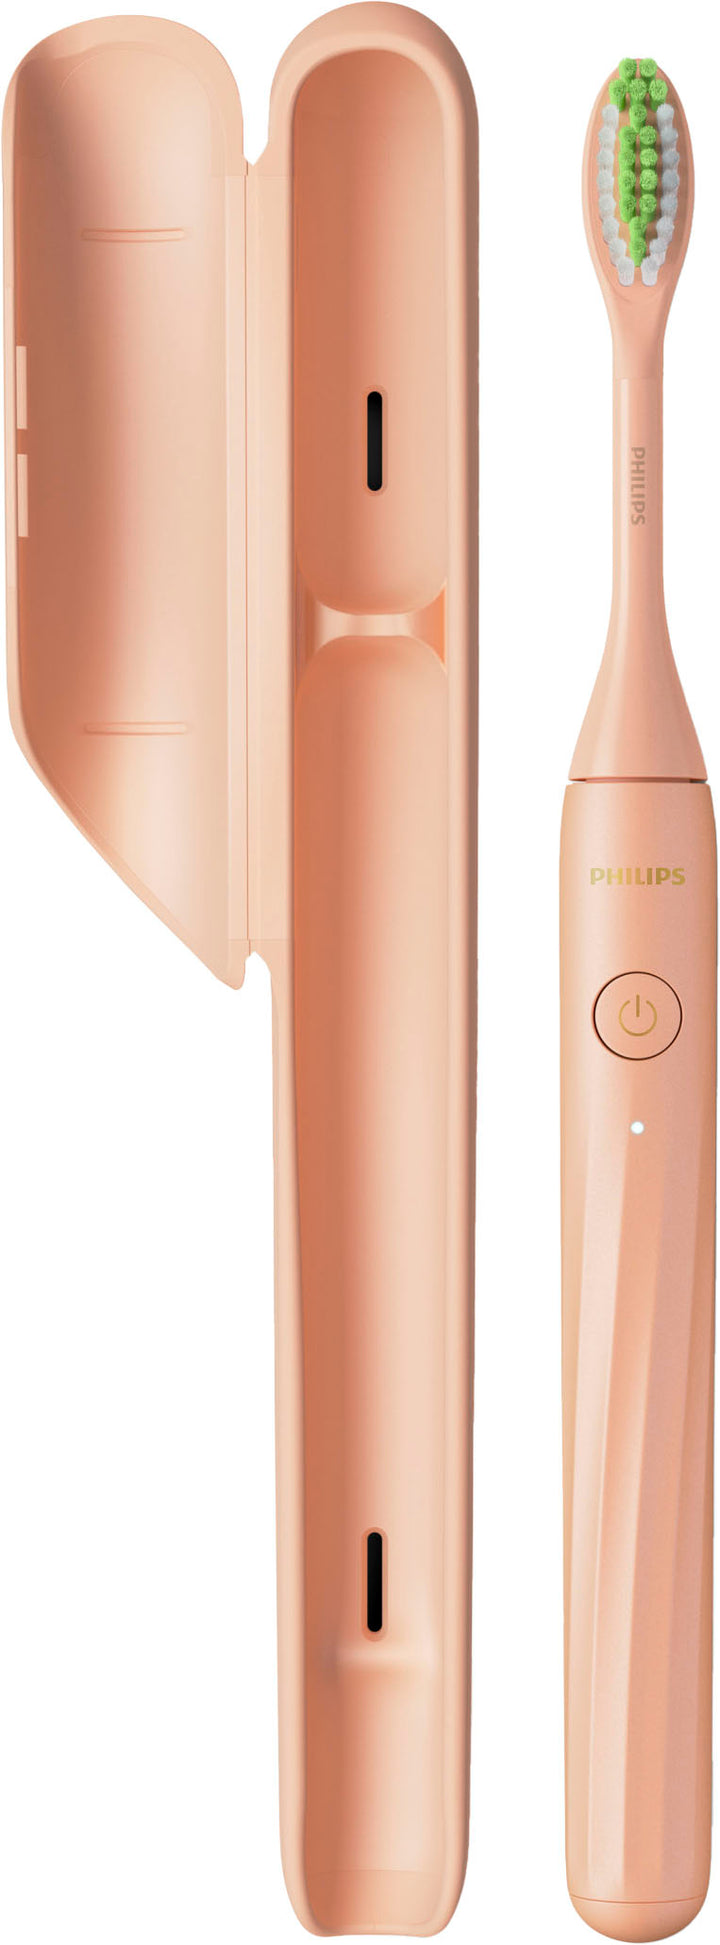 Philips One by Sonicare Rechargeable Toothbrush, Shimmer, HY1200/25 - Shimmer_14